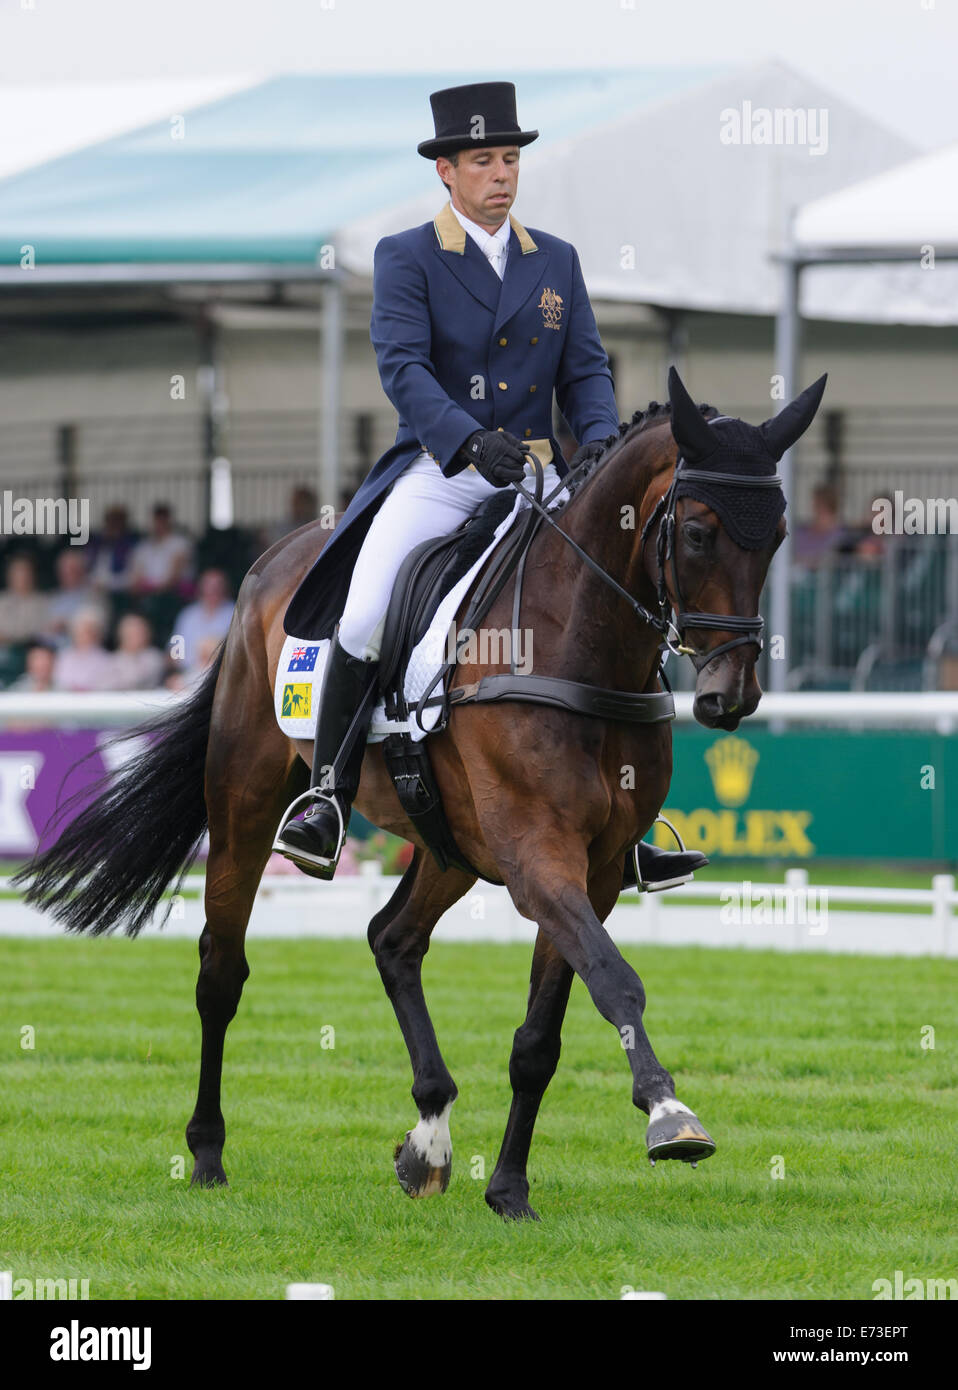 Stamford, Lincs, UK. 4th September, 2014. Sam Griffiths and HAPPY TIMES - Burghley House, Stamford, UK - The Dressage phase,  Land Rover Burghley Horse Trials, 4th September 2014. Credit:  Nico Morgan/Alamy Live News Stock Photo